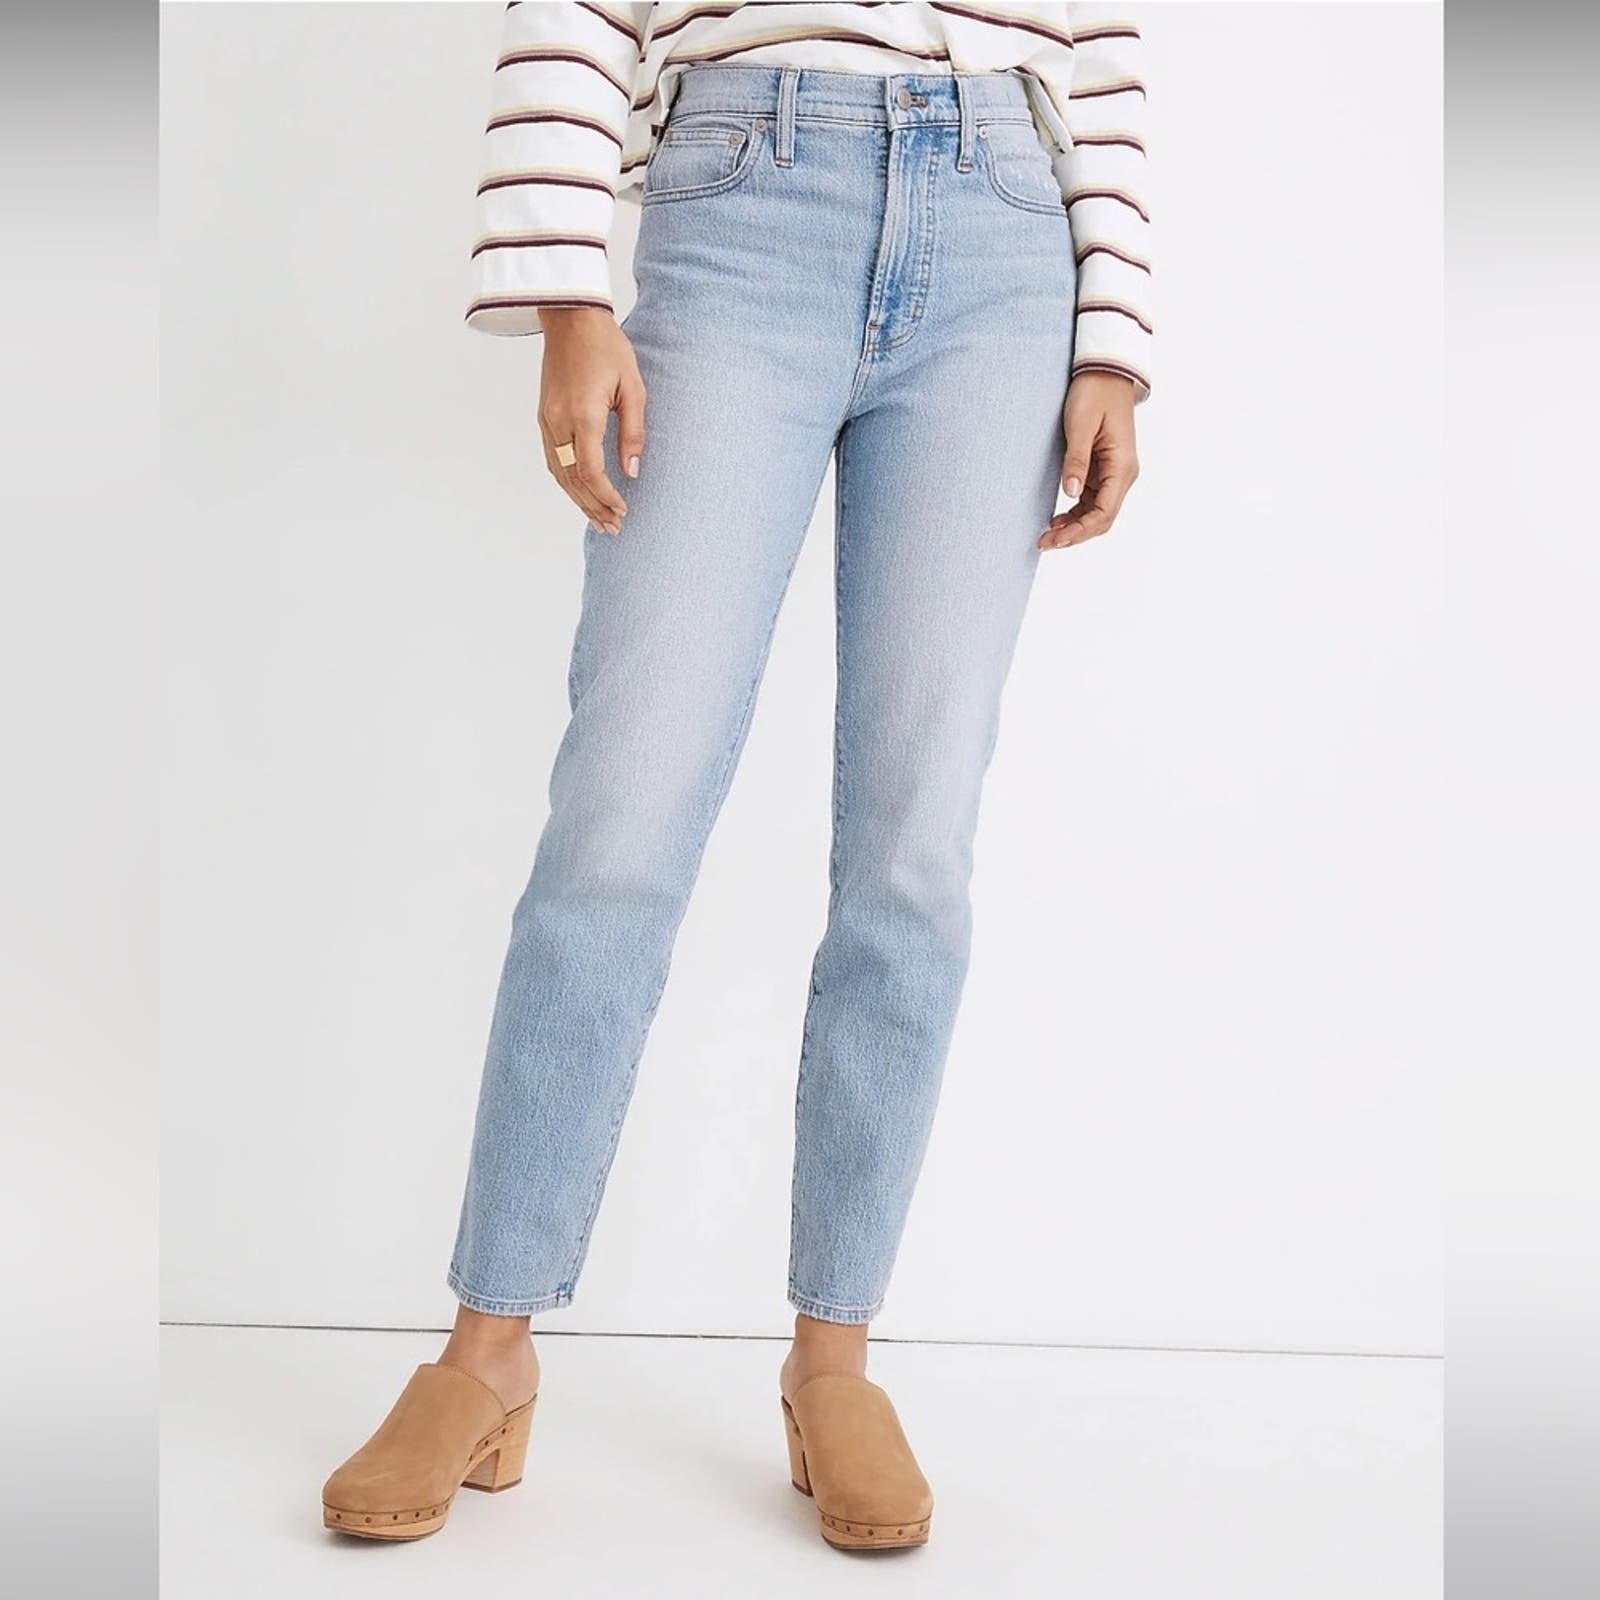 Exclusive Madewell the PERFECT Vintage Jeans Fiore Wash